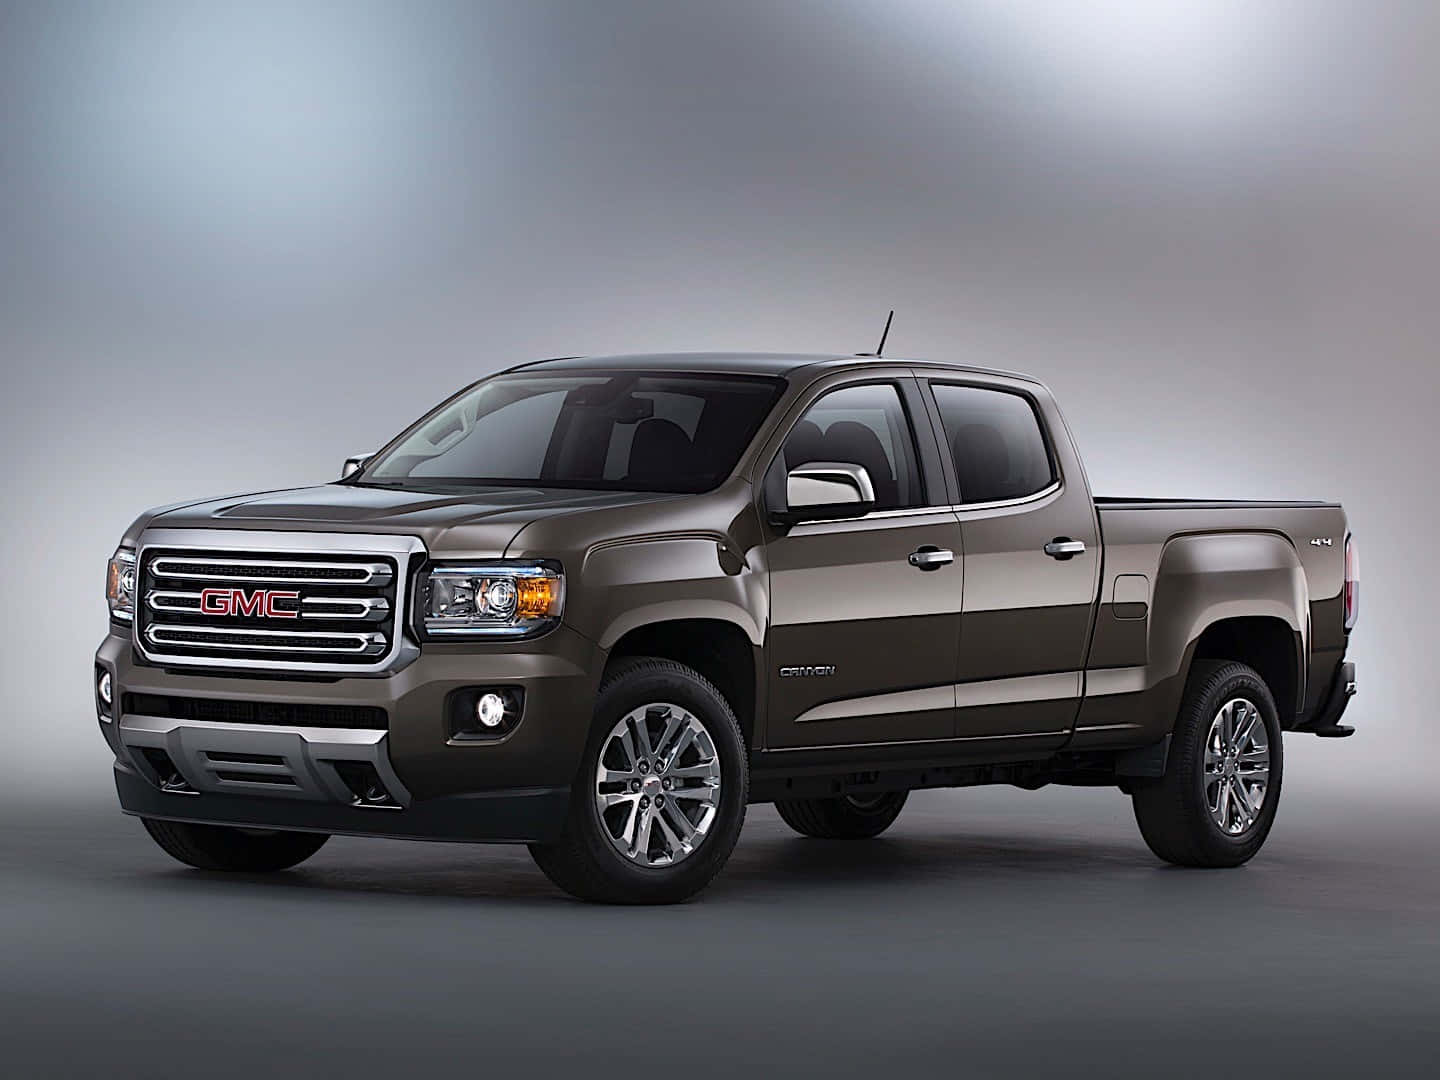 Stunning GMC Canyon in the Outdoors Wallpaper